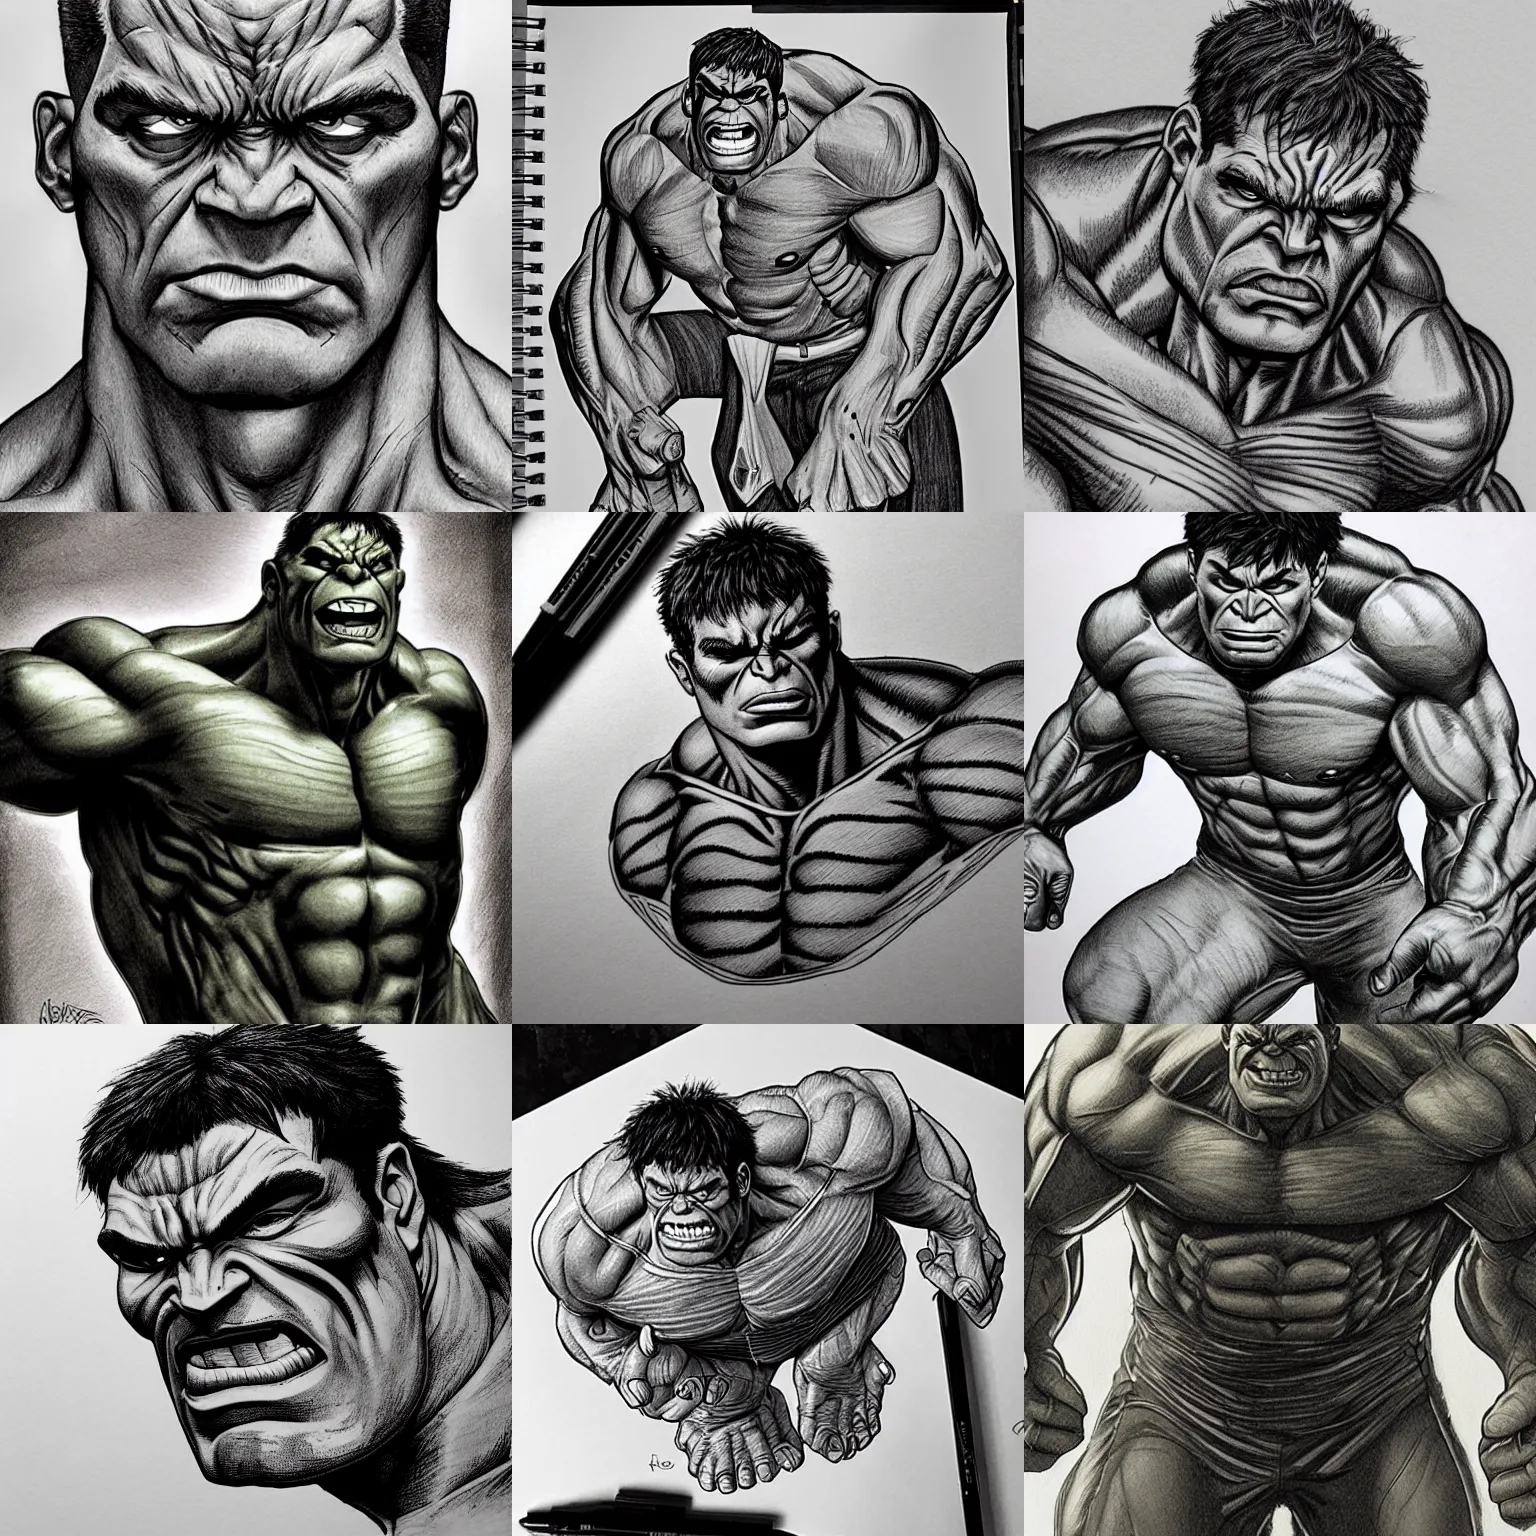 How to Draw the Incredible Hulk Avengers Step by Step - YouTube